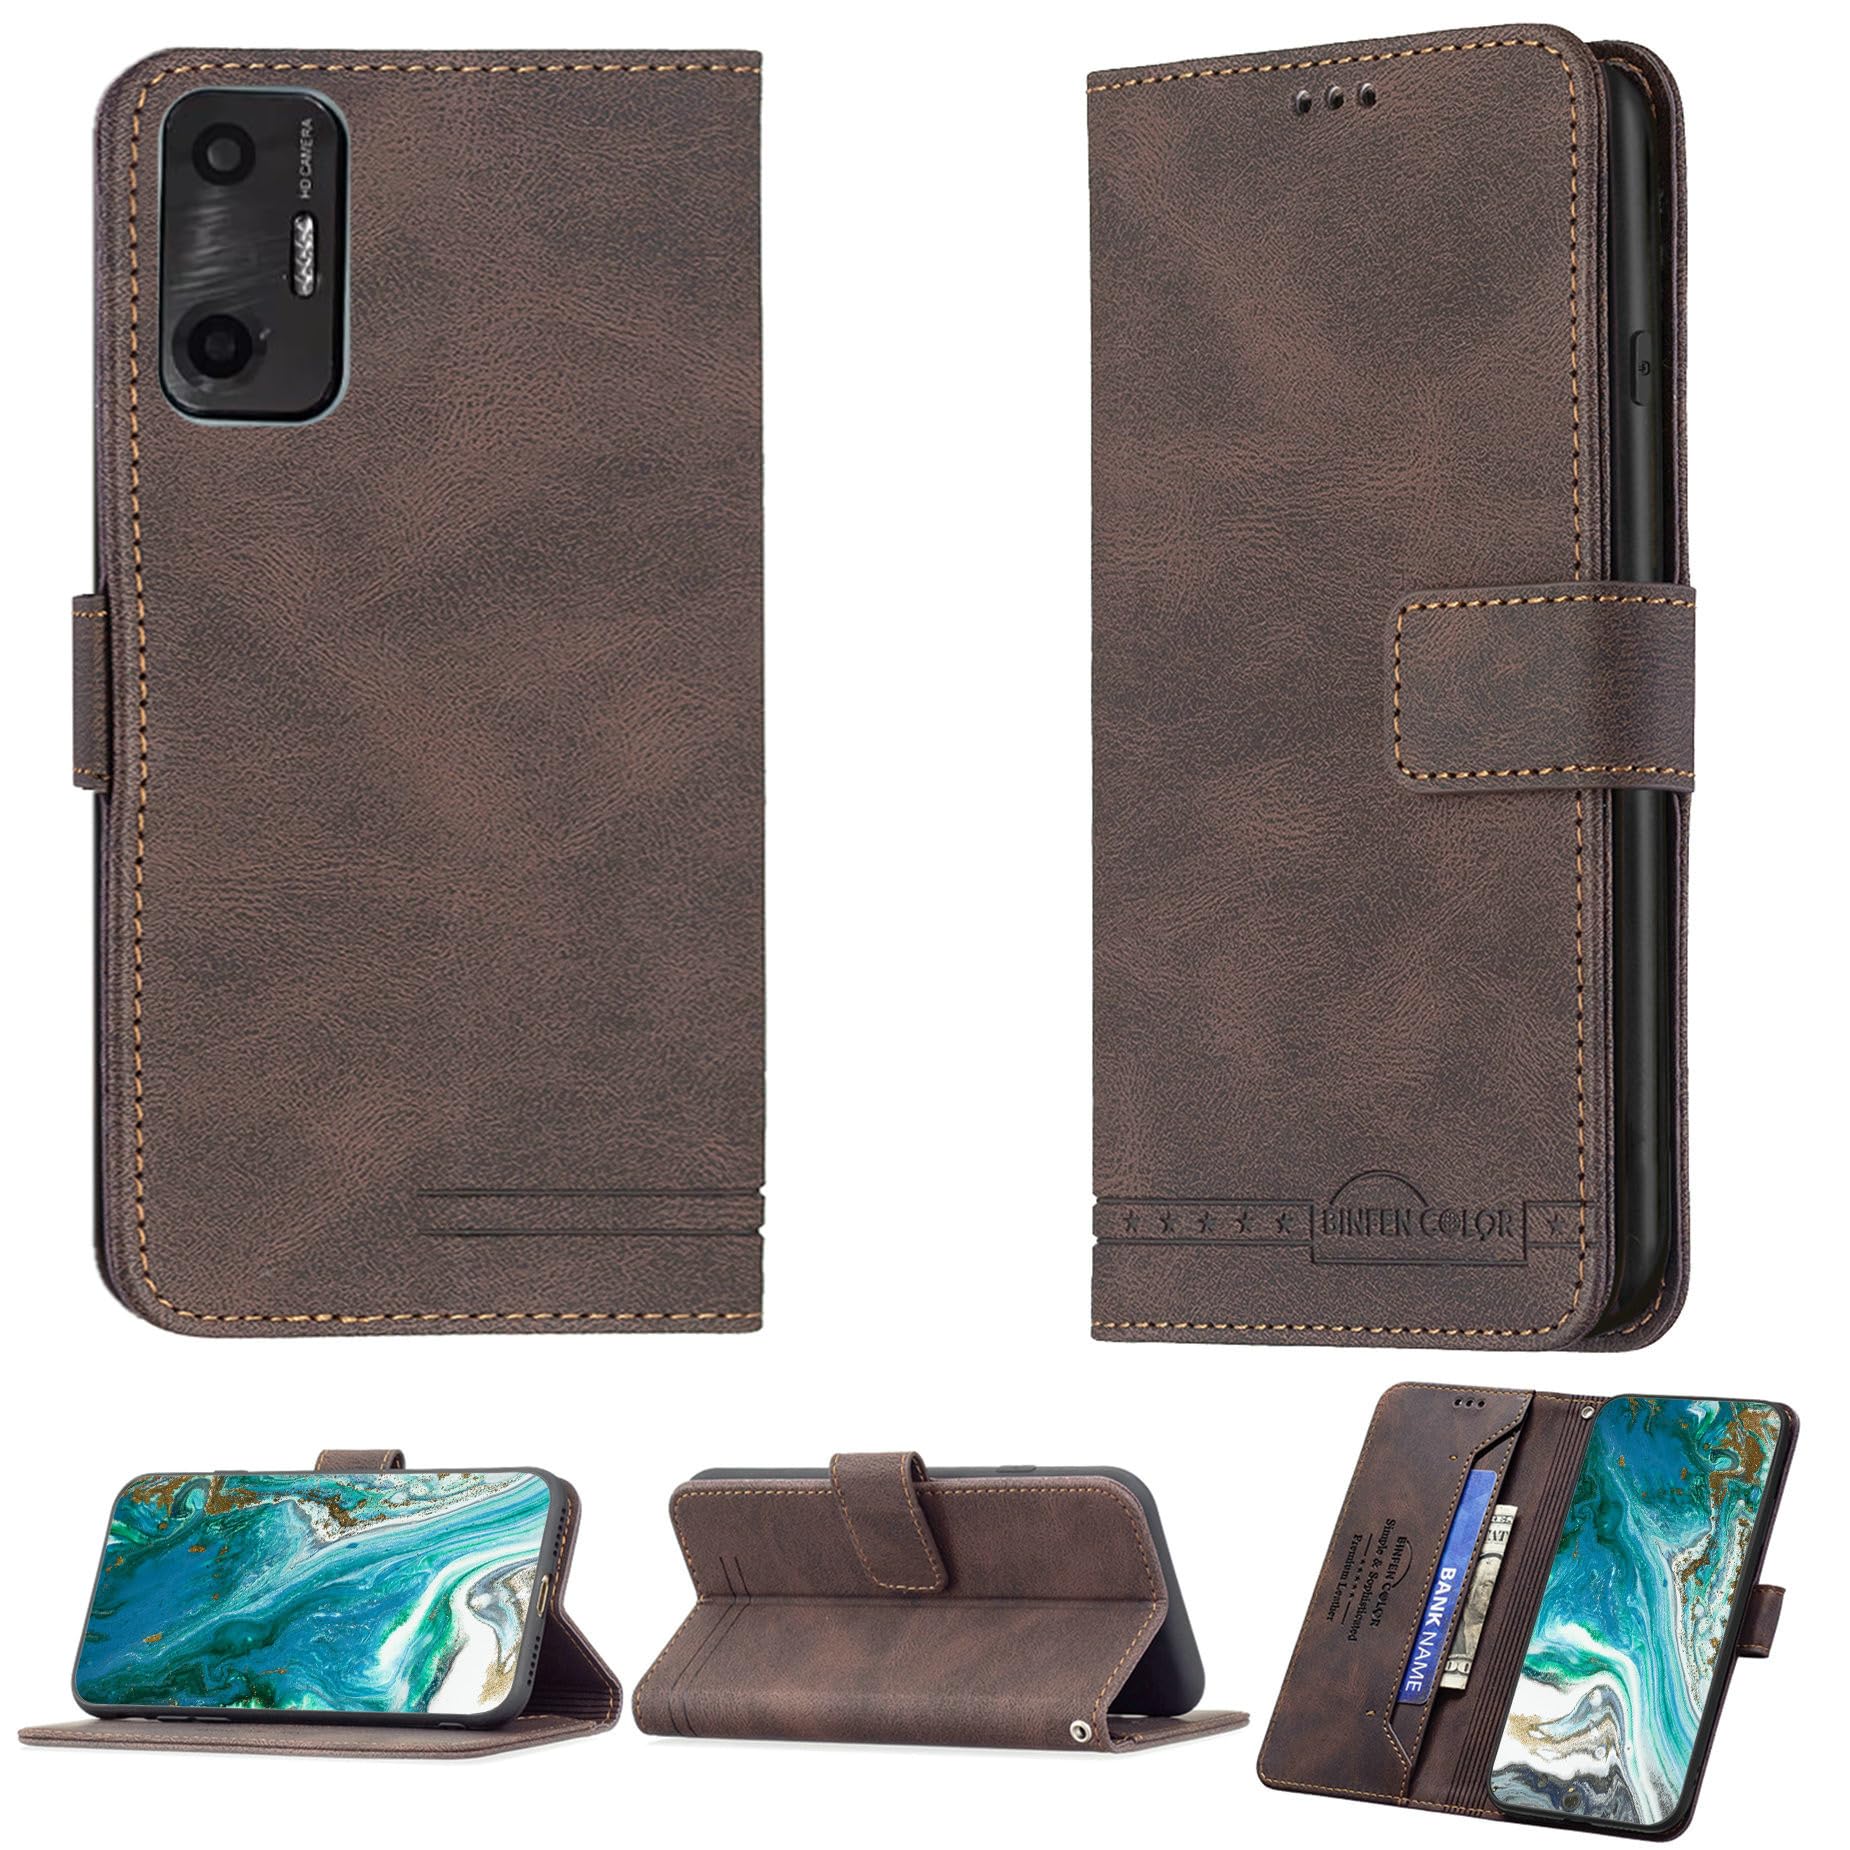 jioeuinly Vortex ZG65 Case Compatible with Vortex ZG65 Phone Case Cover Flip Stand Cover PU Leather BF09 Wallet Case Brown